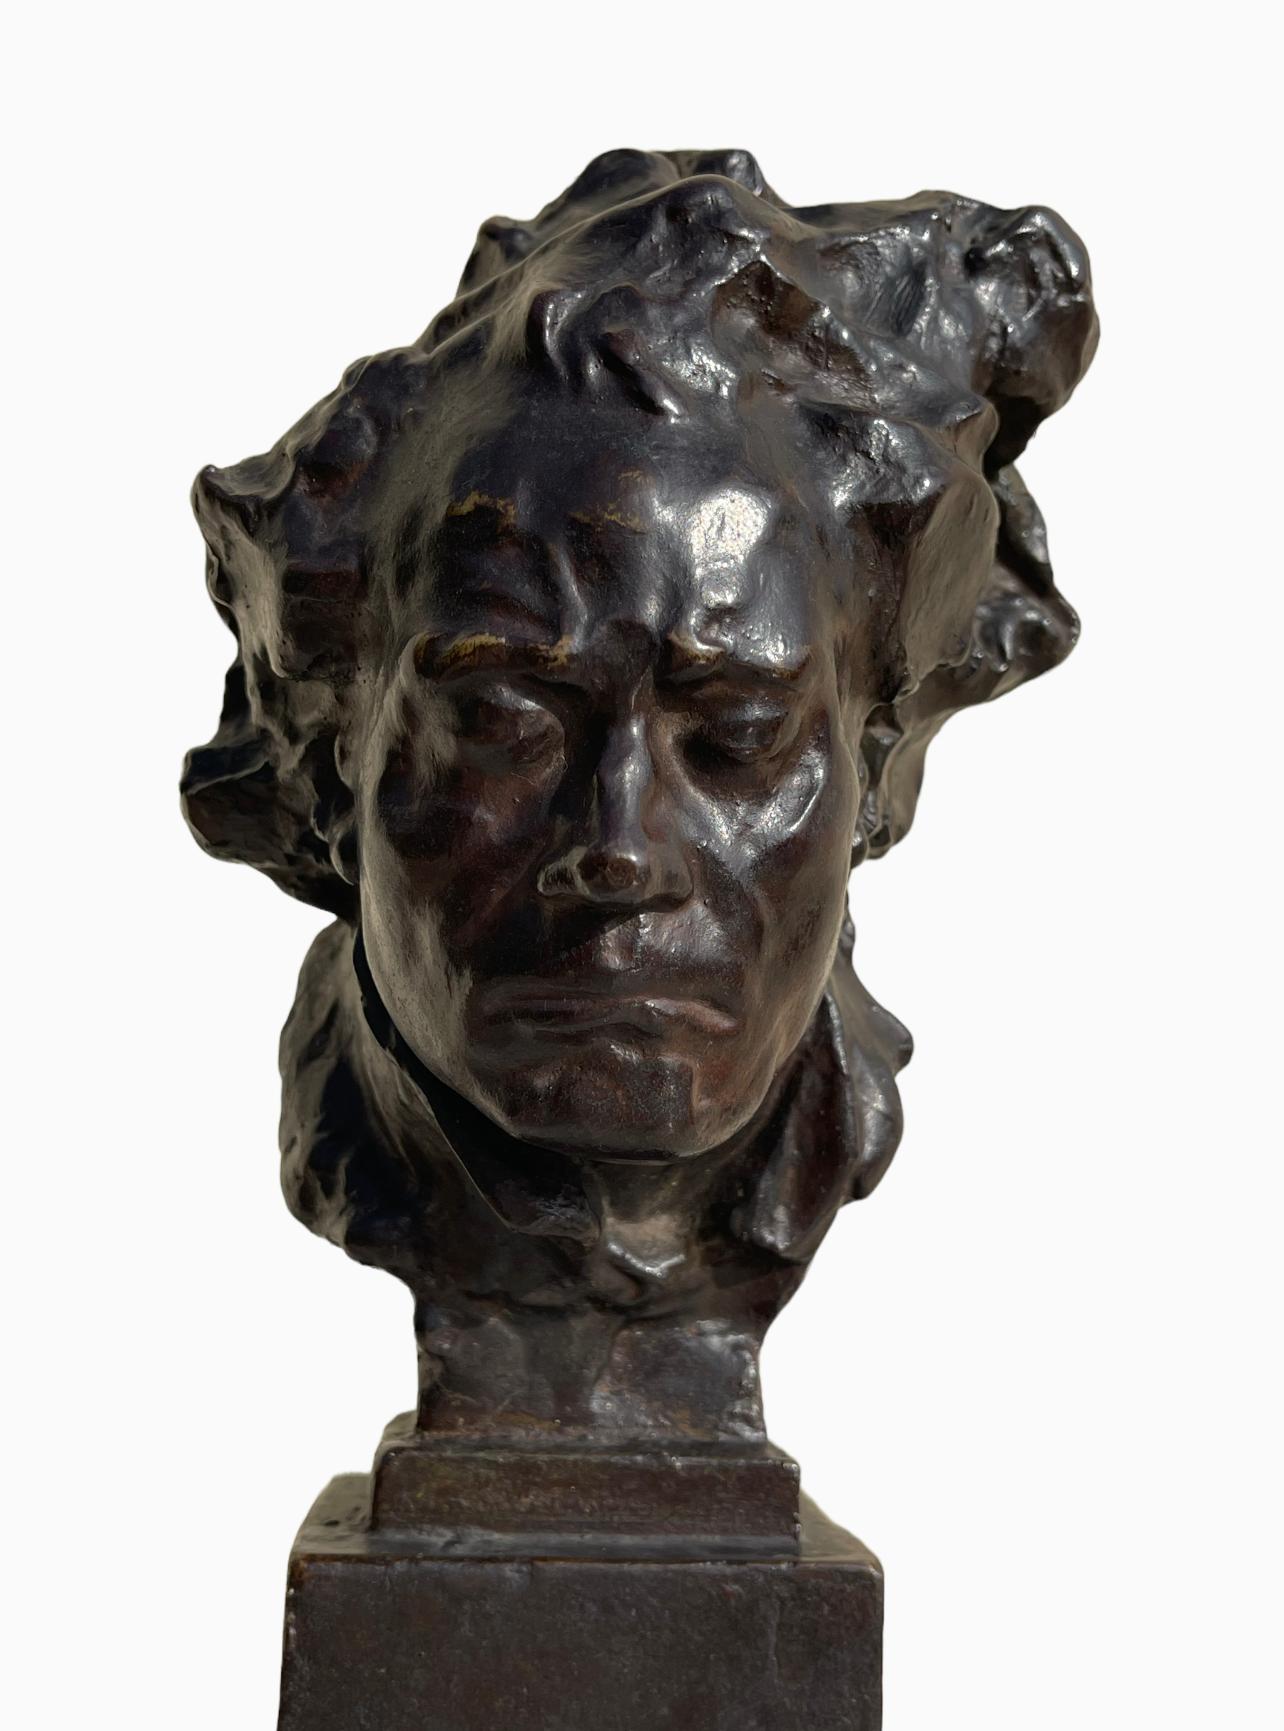 Bust of Beethoven in lost wax bronze with very dark brown patina. Signed Alfredo PINA and bears the founder's stamp 